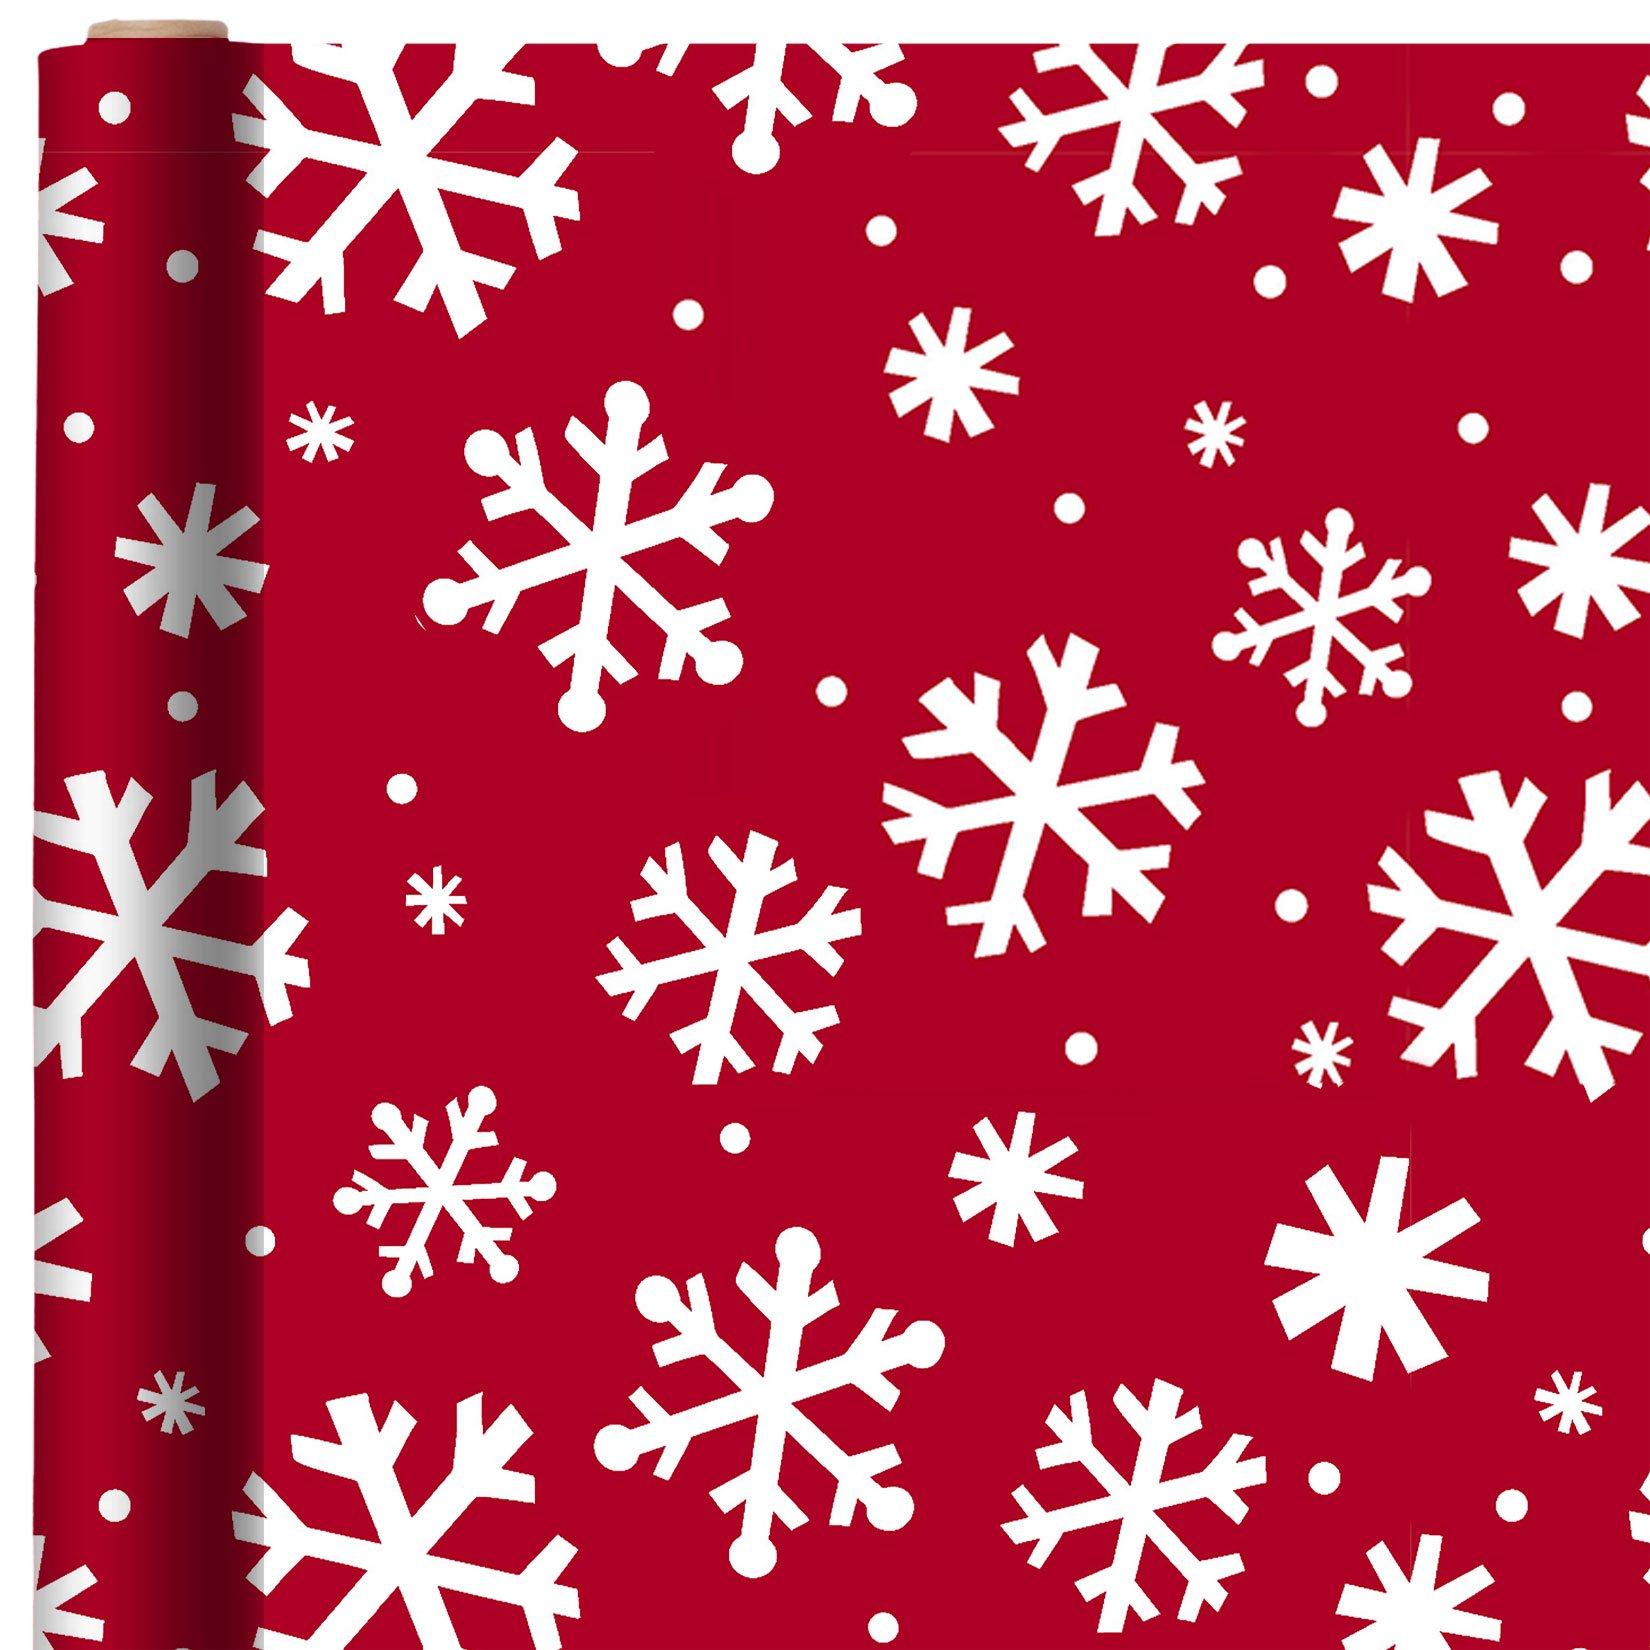 Extra Long Metallic Red & White Silver Polka Dot Snowflakes Sparkle Gift  Wrap Wrapping Paper Large 18ft Roll